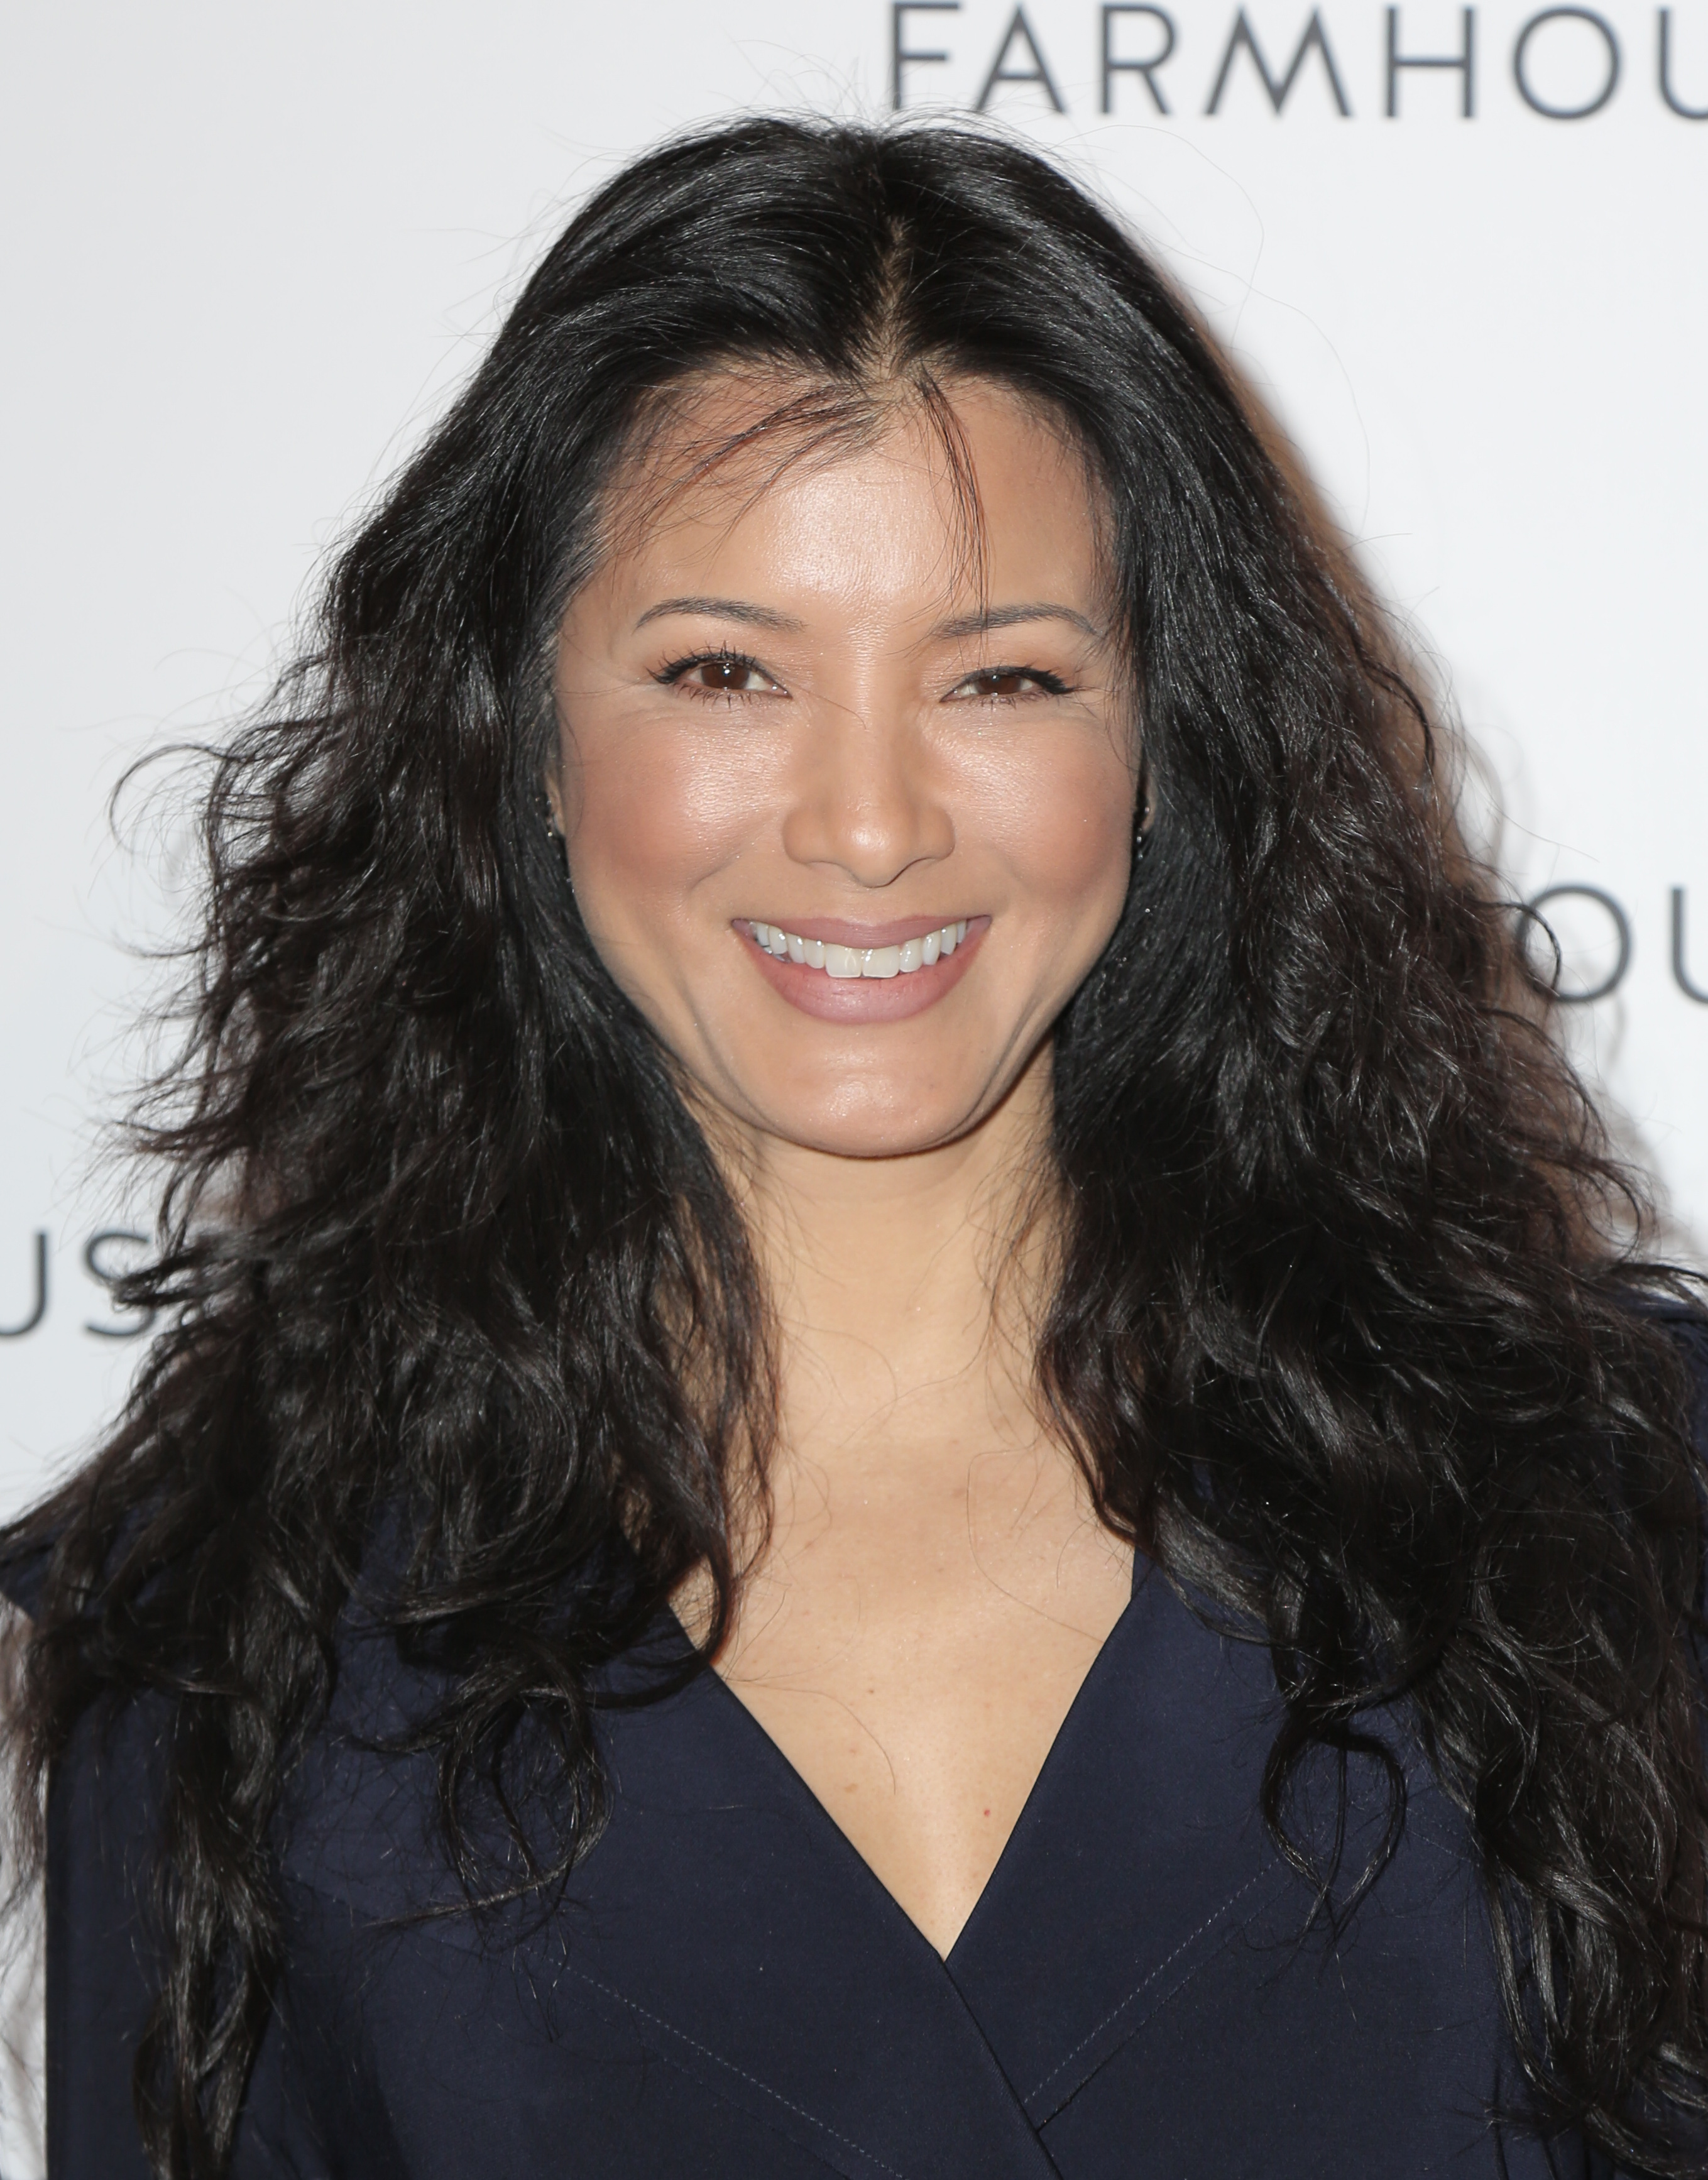 kelly-hu-grand-opening-of-farmhouse-held-at-the-beverly-center-31518.jpg